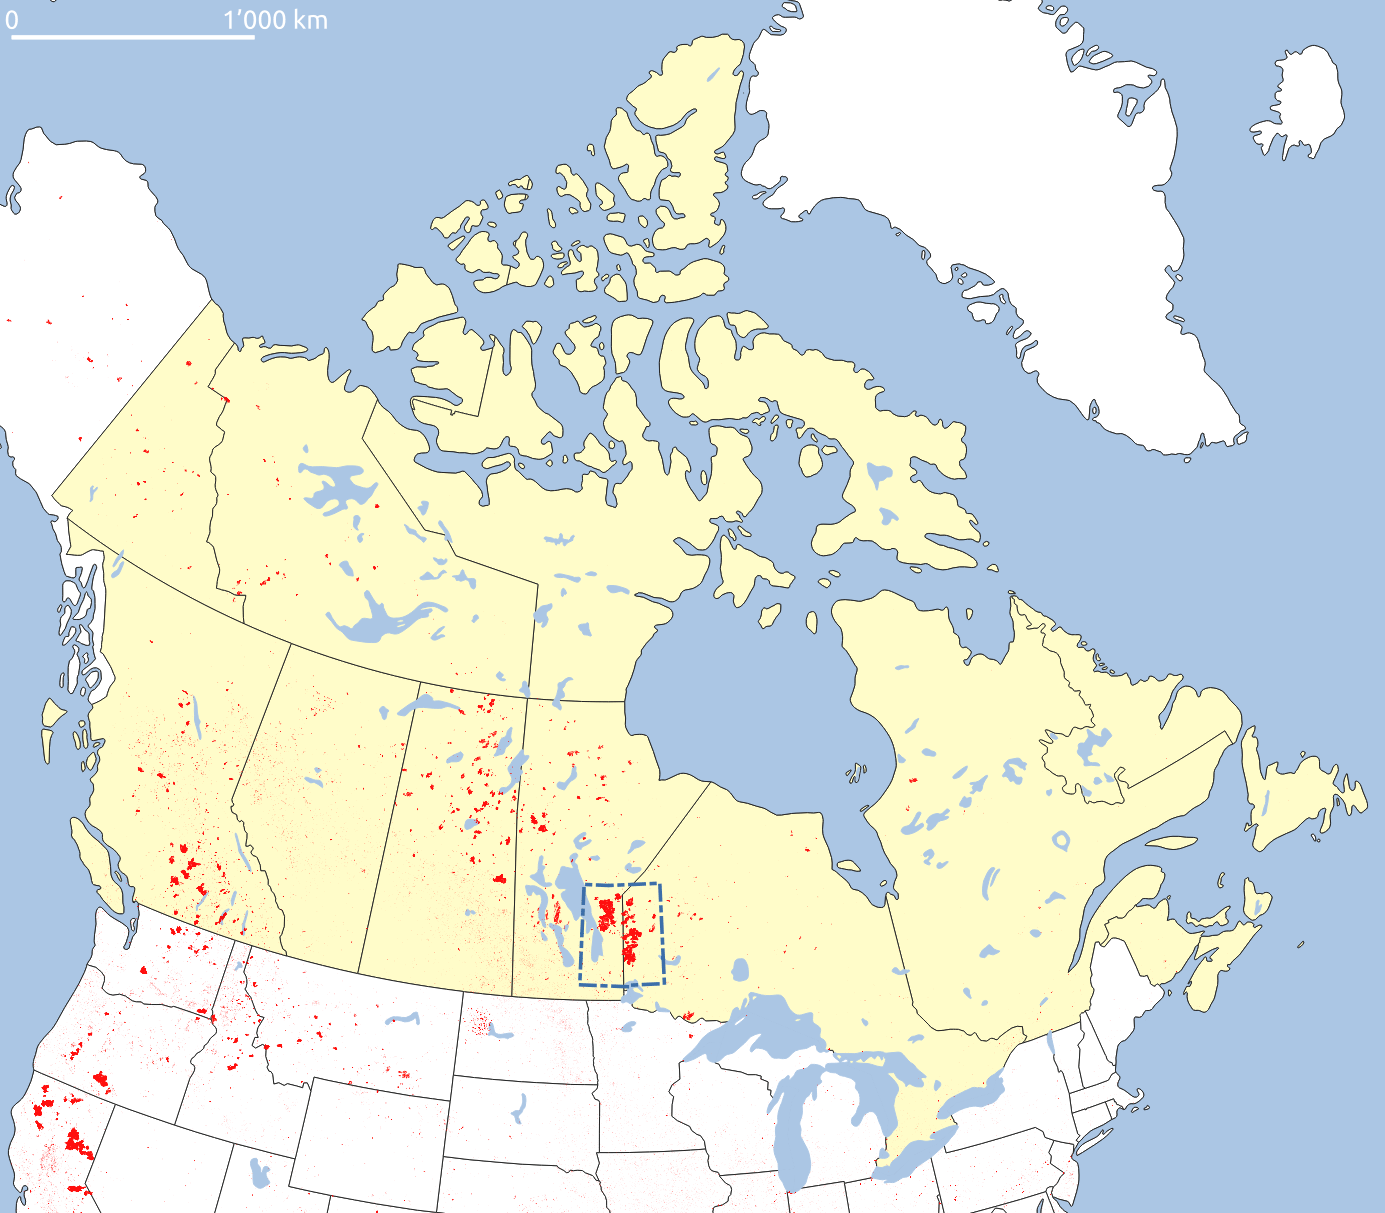 location of our wildfire study area within Canada